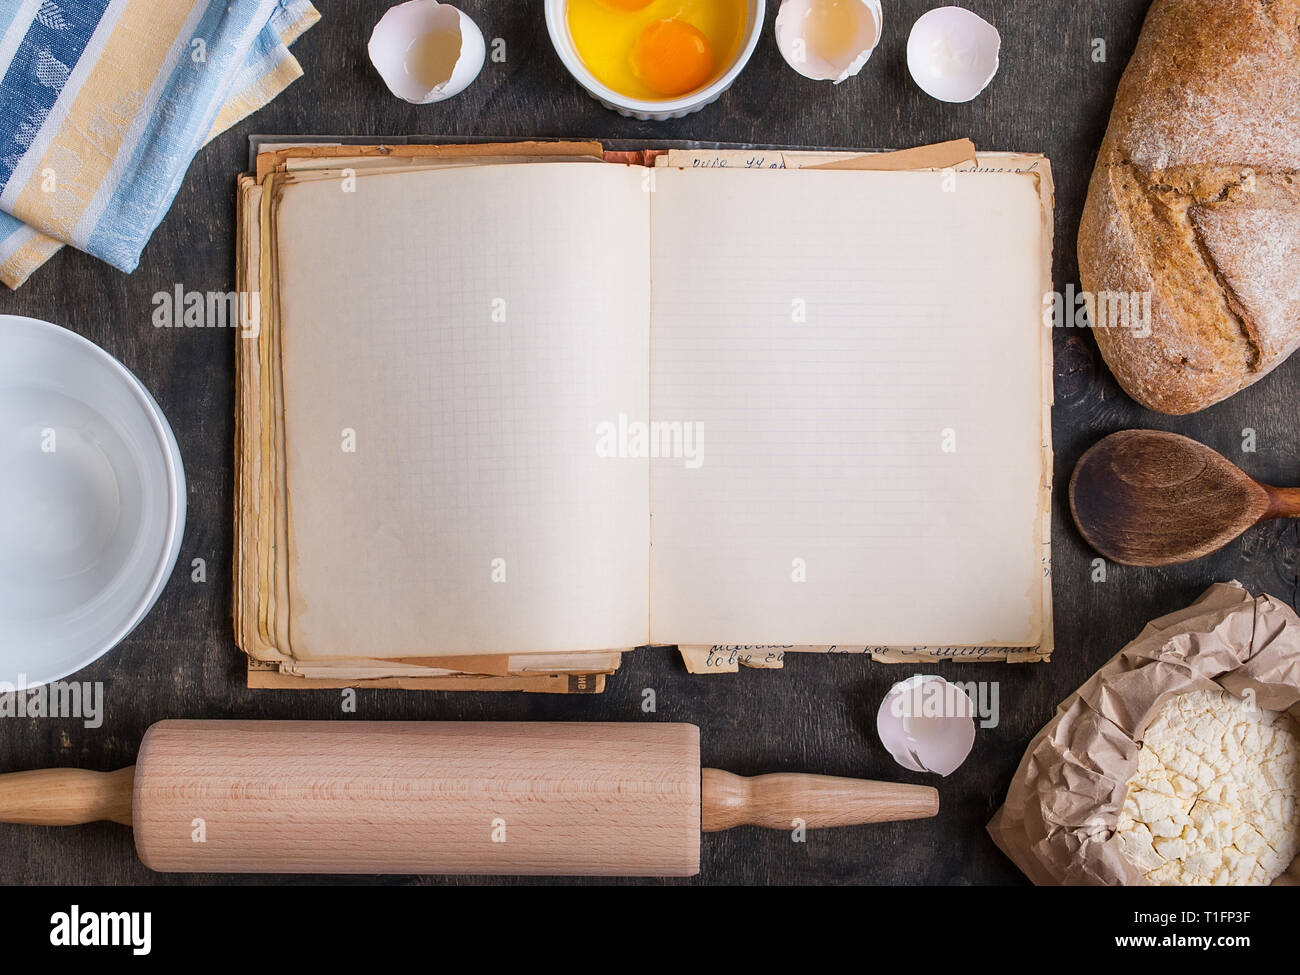 Baking background with blank cook book, flour, rolling pin Stock Photo ...